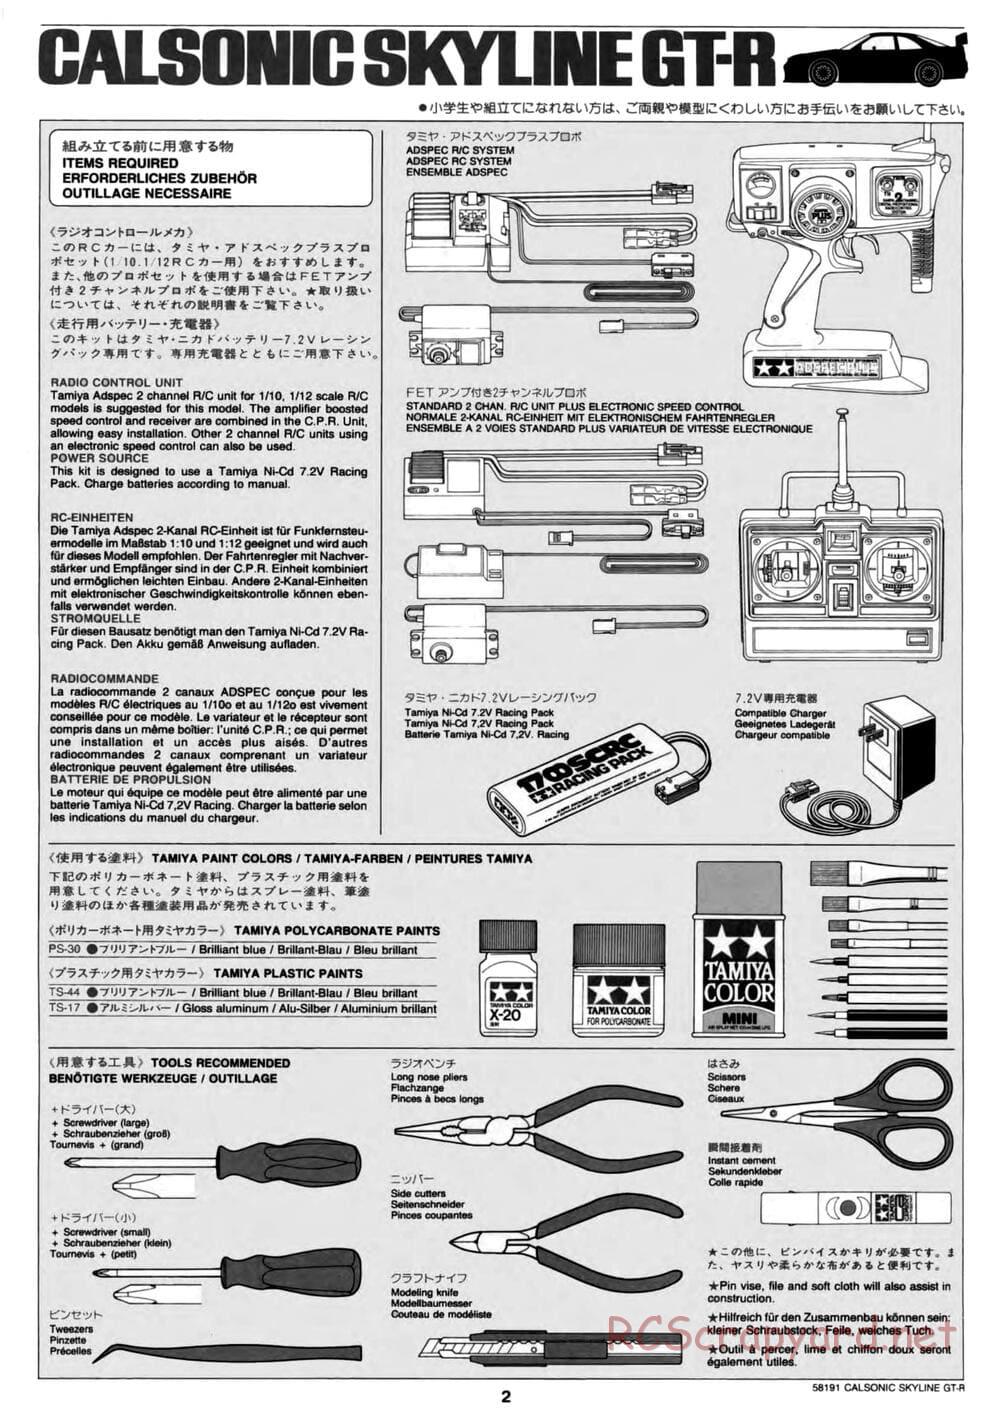 Tamiya - Calsonic Skyline GT-R - TL-01 Chassis - Manual - Page 2